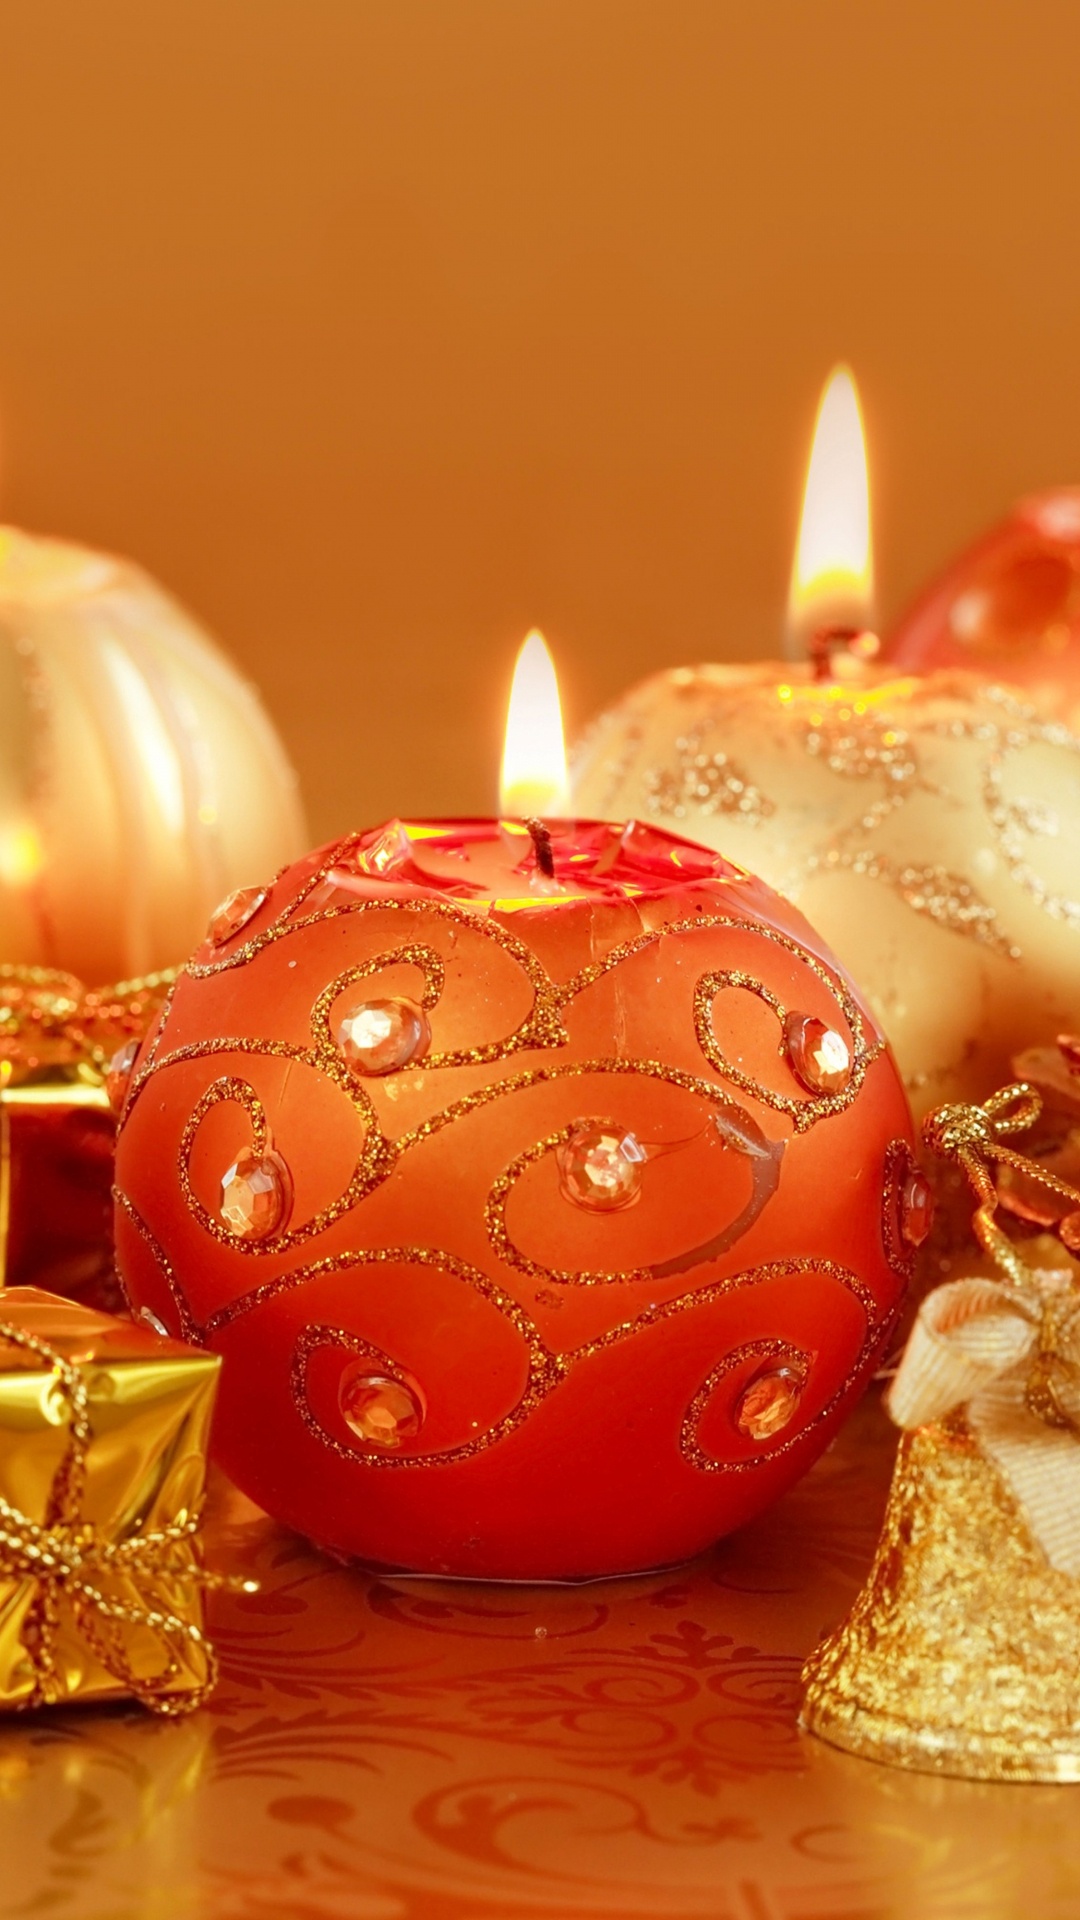 Christmas Day, New Year, Candle, Still Life, Lighting. Wallpaper in 1080x1920 Resolution